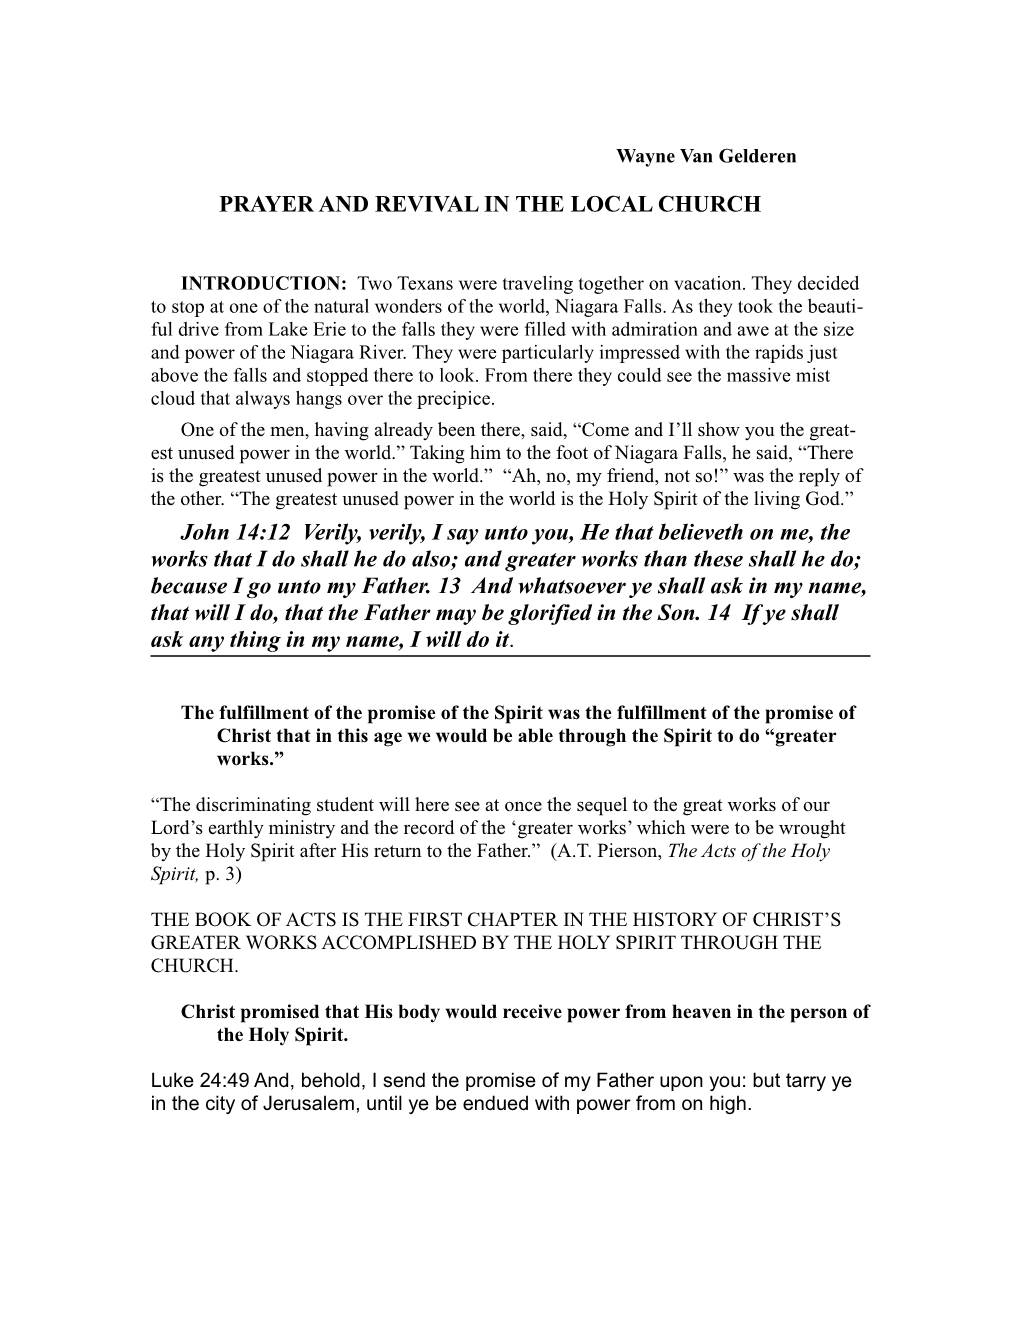 Prayer and Revival in the Local Church